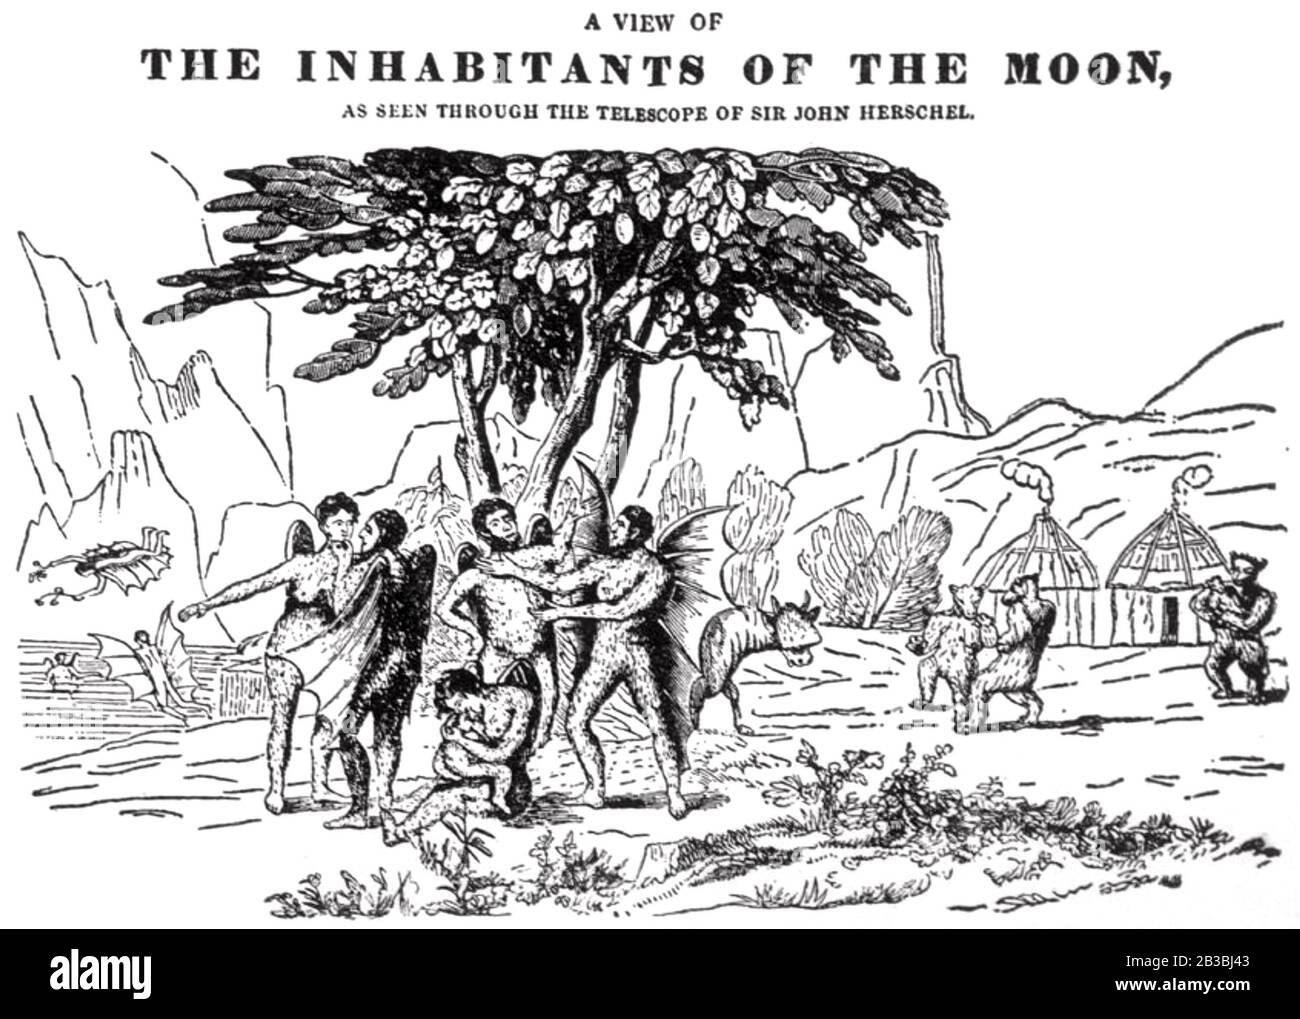 JOHN HERSCHEL (1792-1871) English astronomer and polymath. A contemporary cartoon showing the imaginary inhabitants of the moon revealed by his telescope. Stock Photo